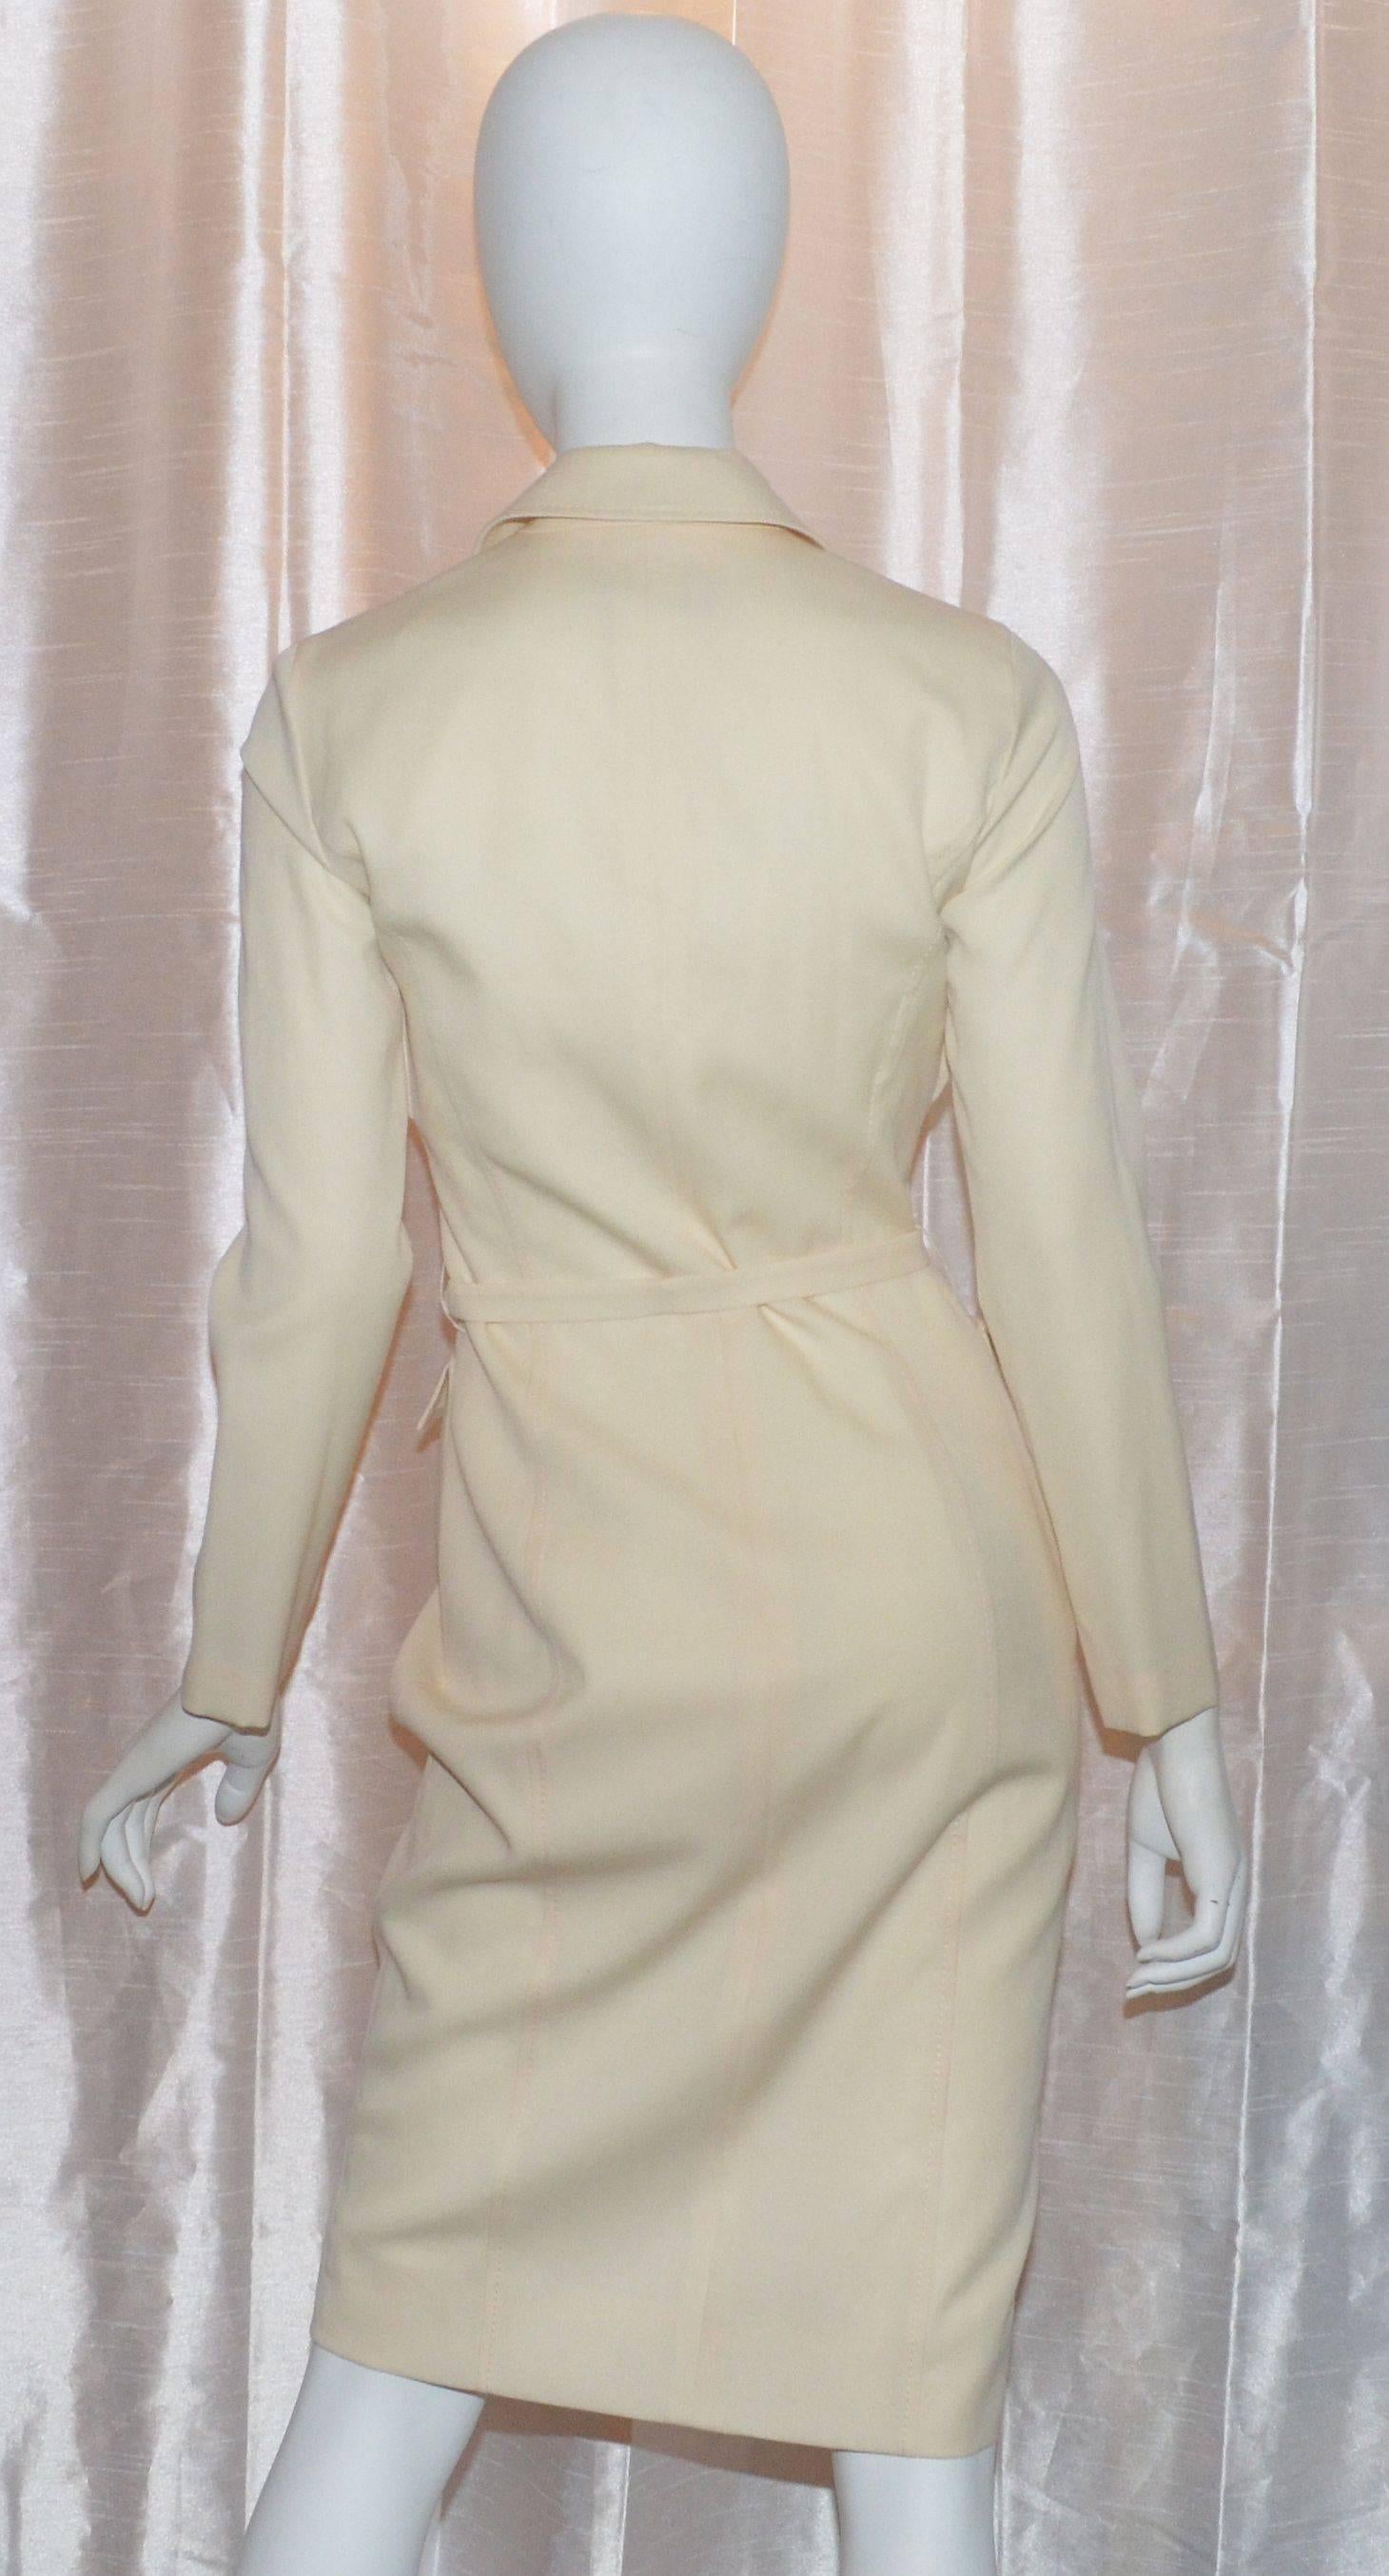 Carolina Herrera Ivory Virgin Wool Belted Coat / Dress

Carolina Herrera coat features a concealed button front closure, waist tie, faux pockets at the bust and waist, and is fully lined. Size 4 but fits like a 2 -- Please see measurements. Made